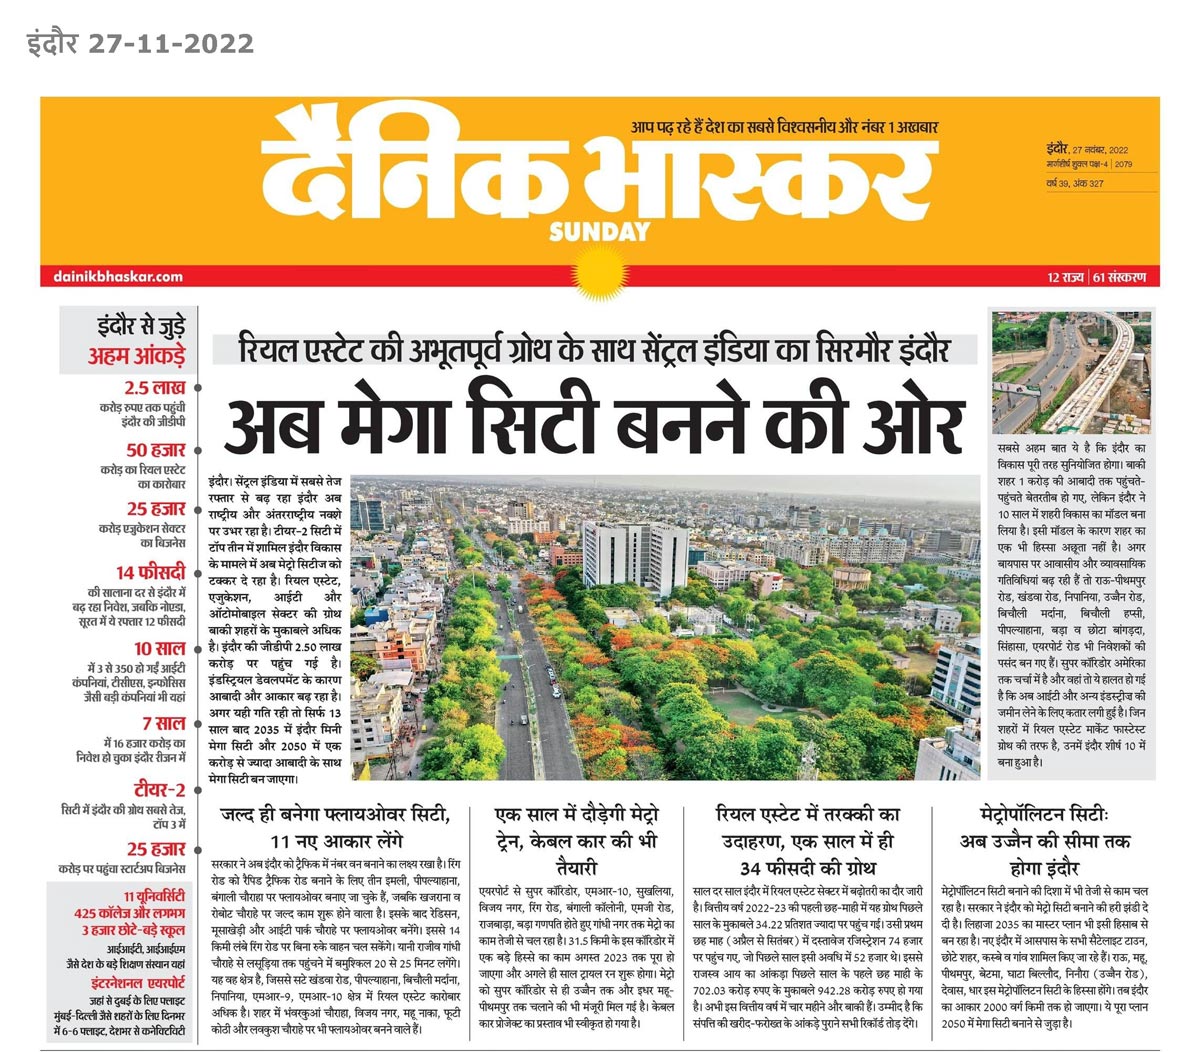 Indore to become a Mega city, spearheading Real estate growth in Madhya Pradesh